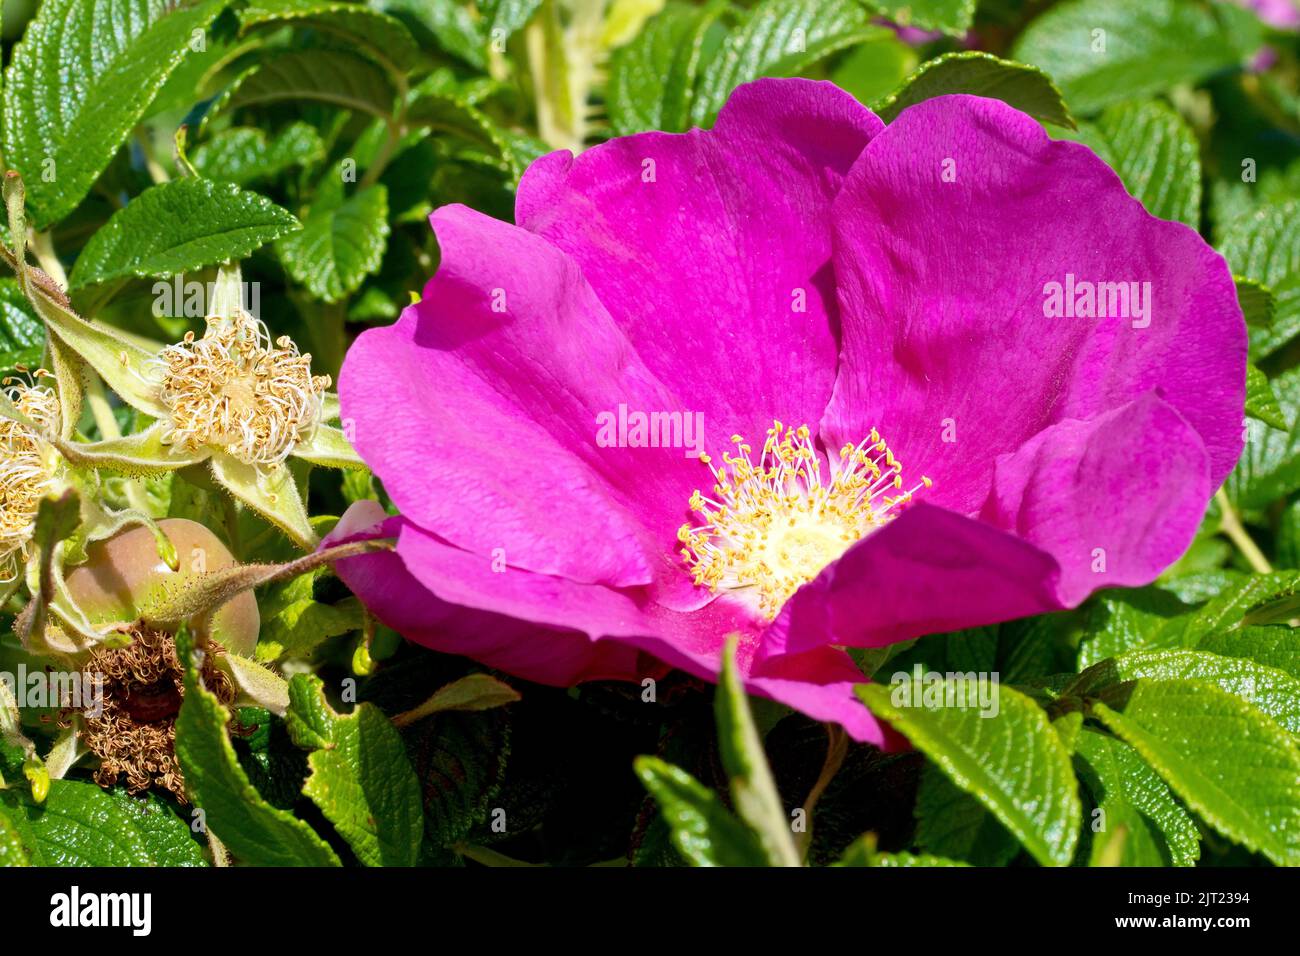 Wild Rose or Japanese Rose (rosa rugosa rubra), close up of a single large pink flower of the commonly planted and naturalised shrub. Stock Photo